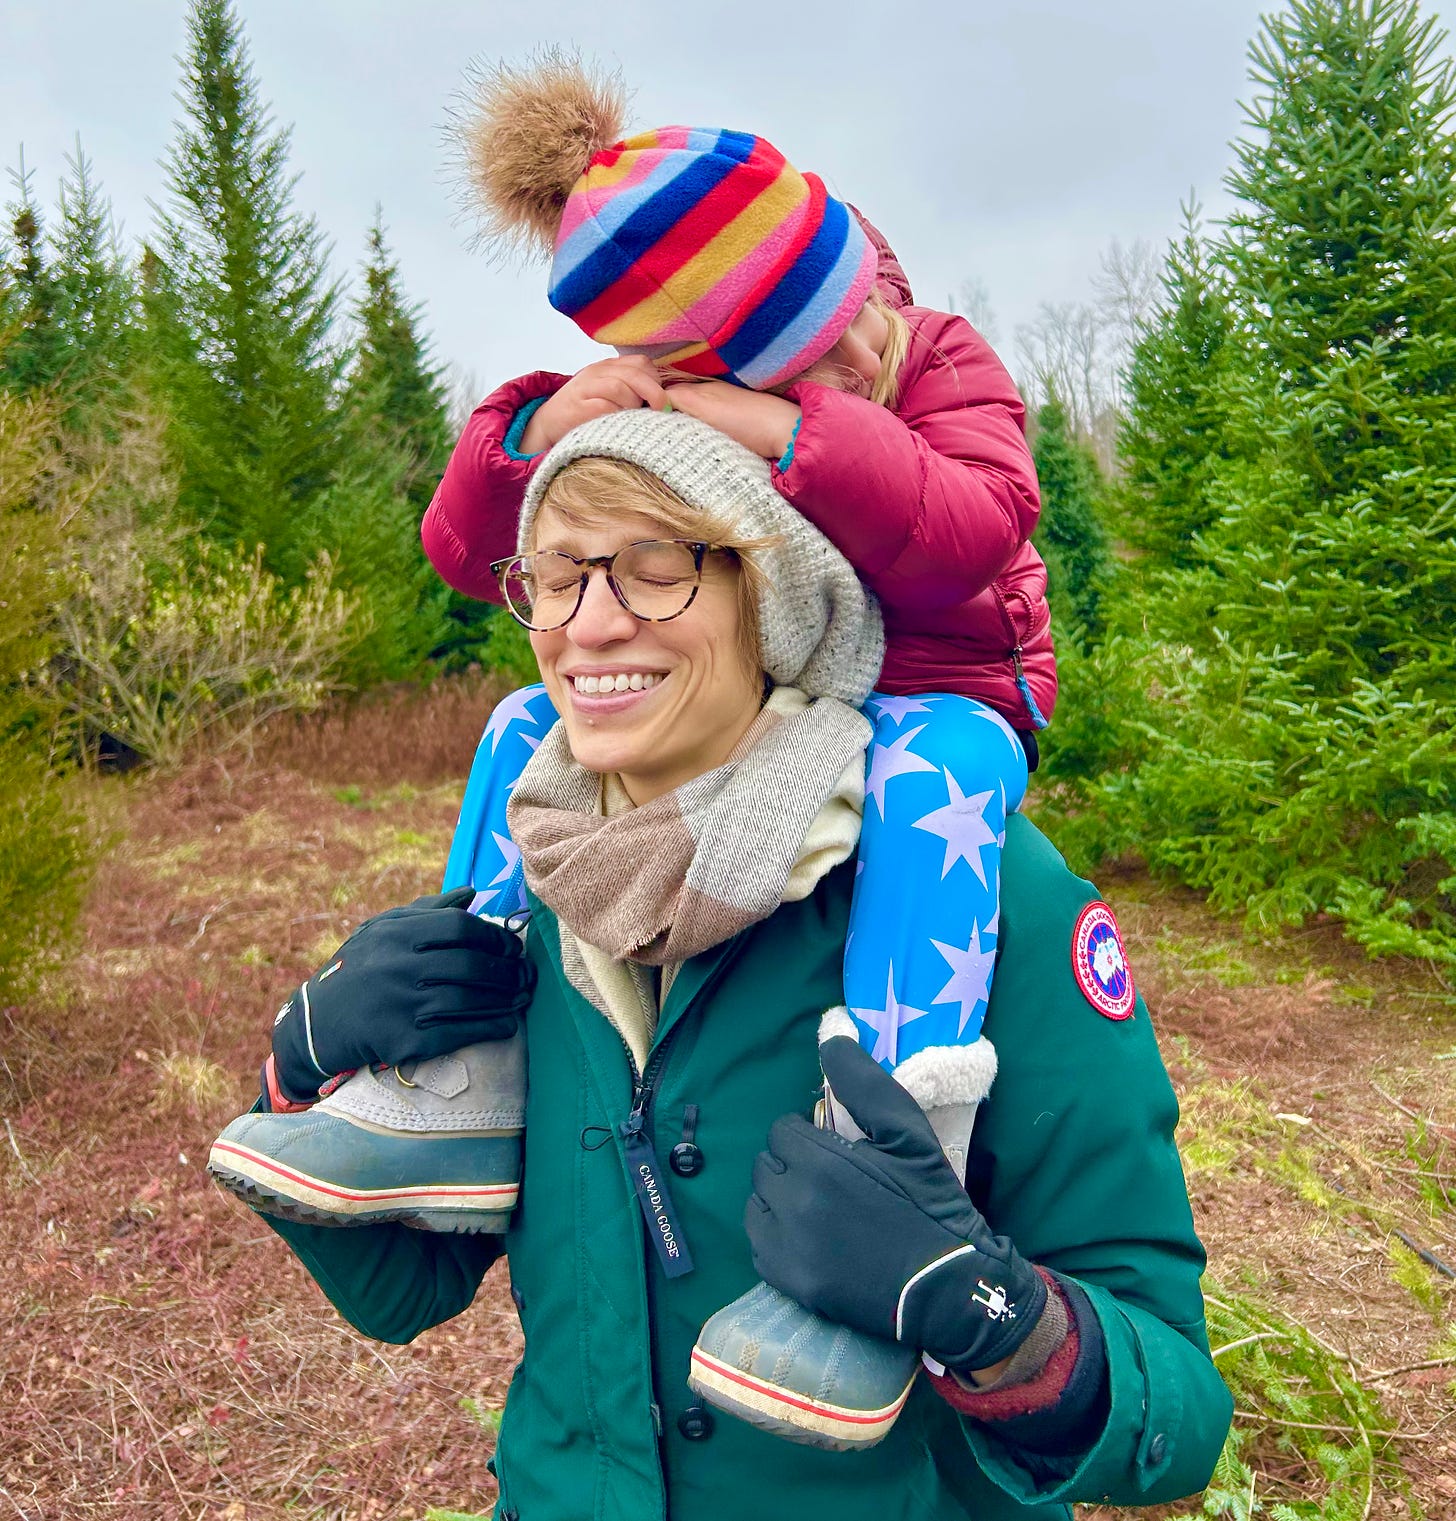 Susan with her daughter on her shoulders at a Christmas tree farm with a gray sky and green fir trees. Susan is smiling, her daughter's face is hidden to the side.